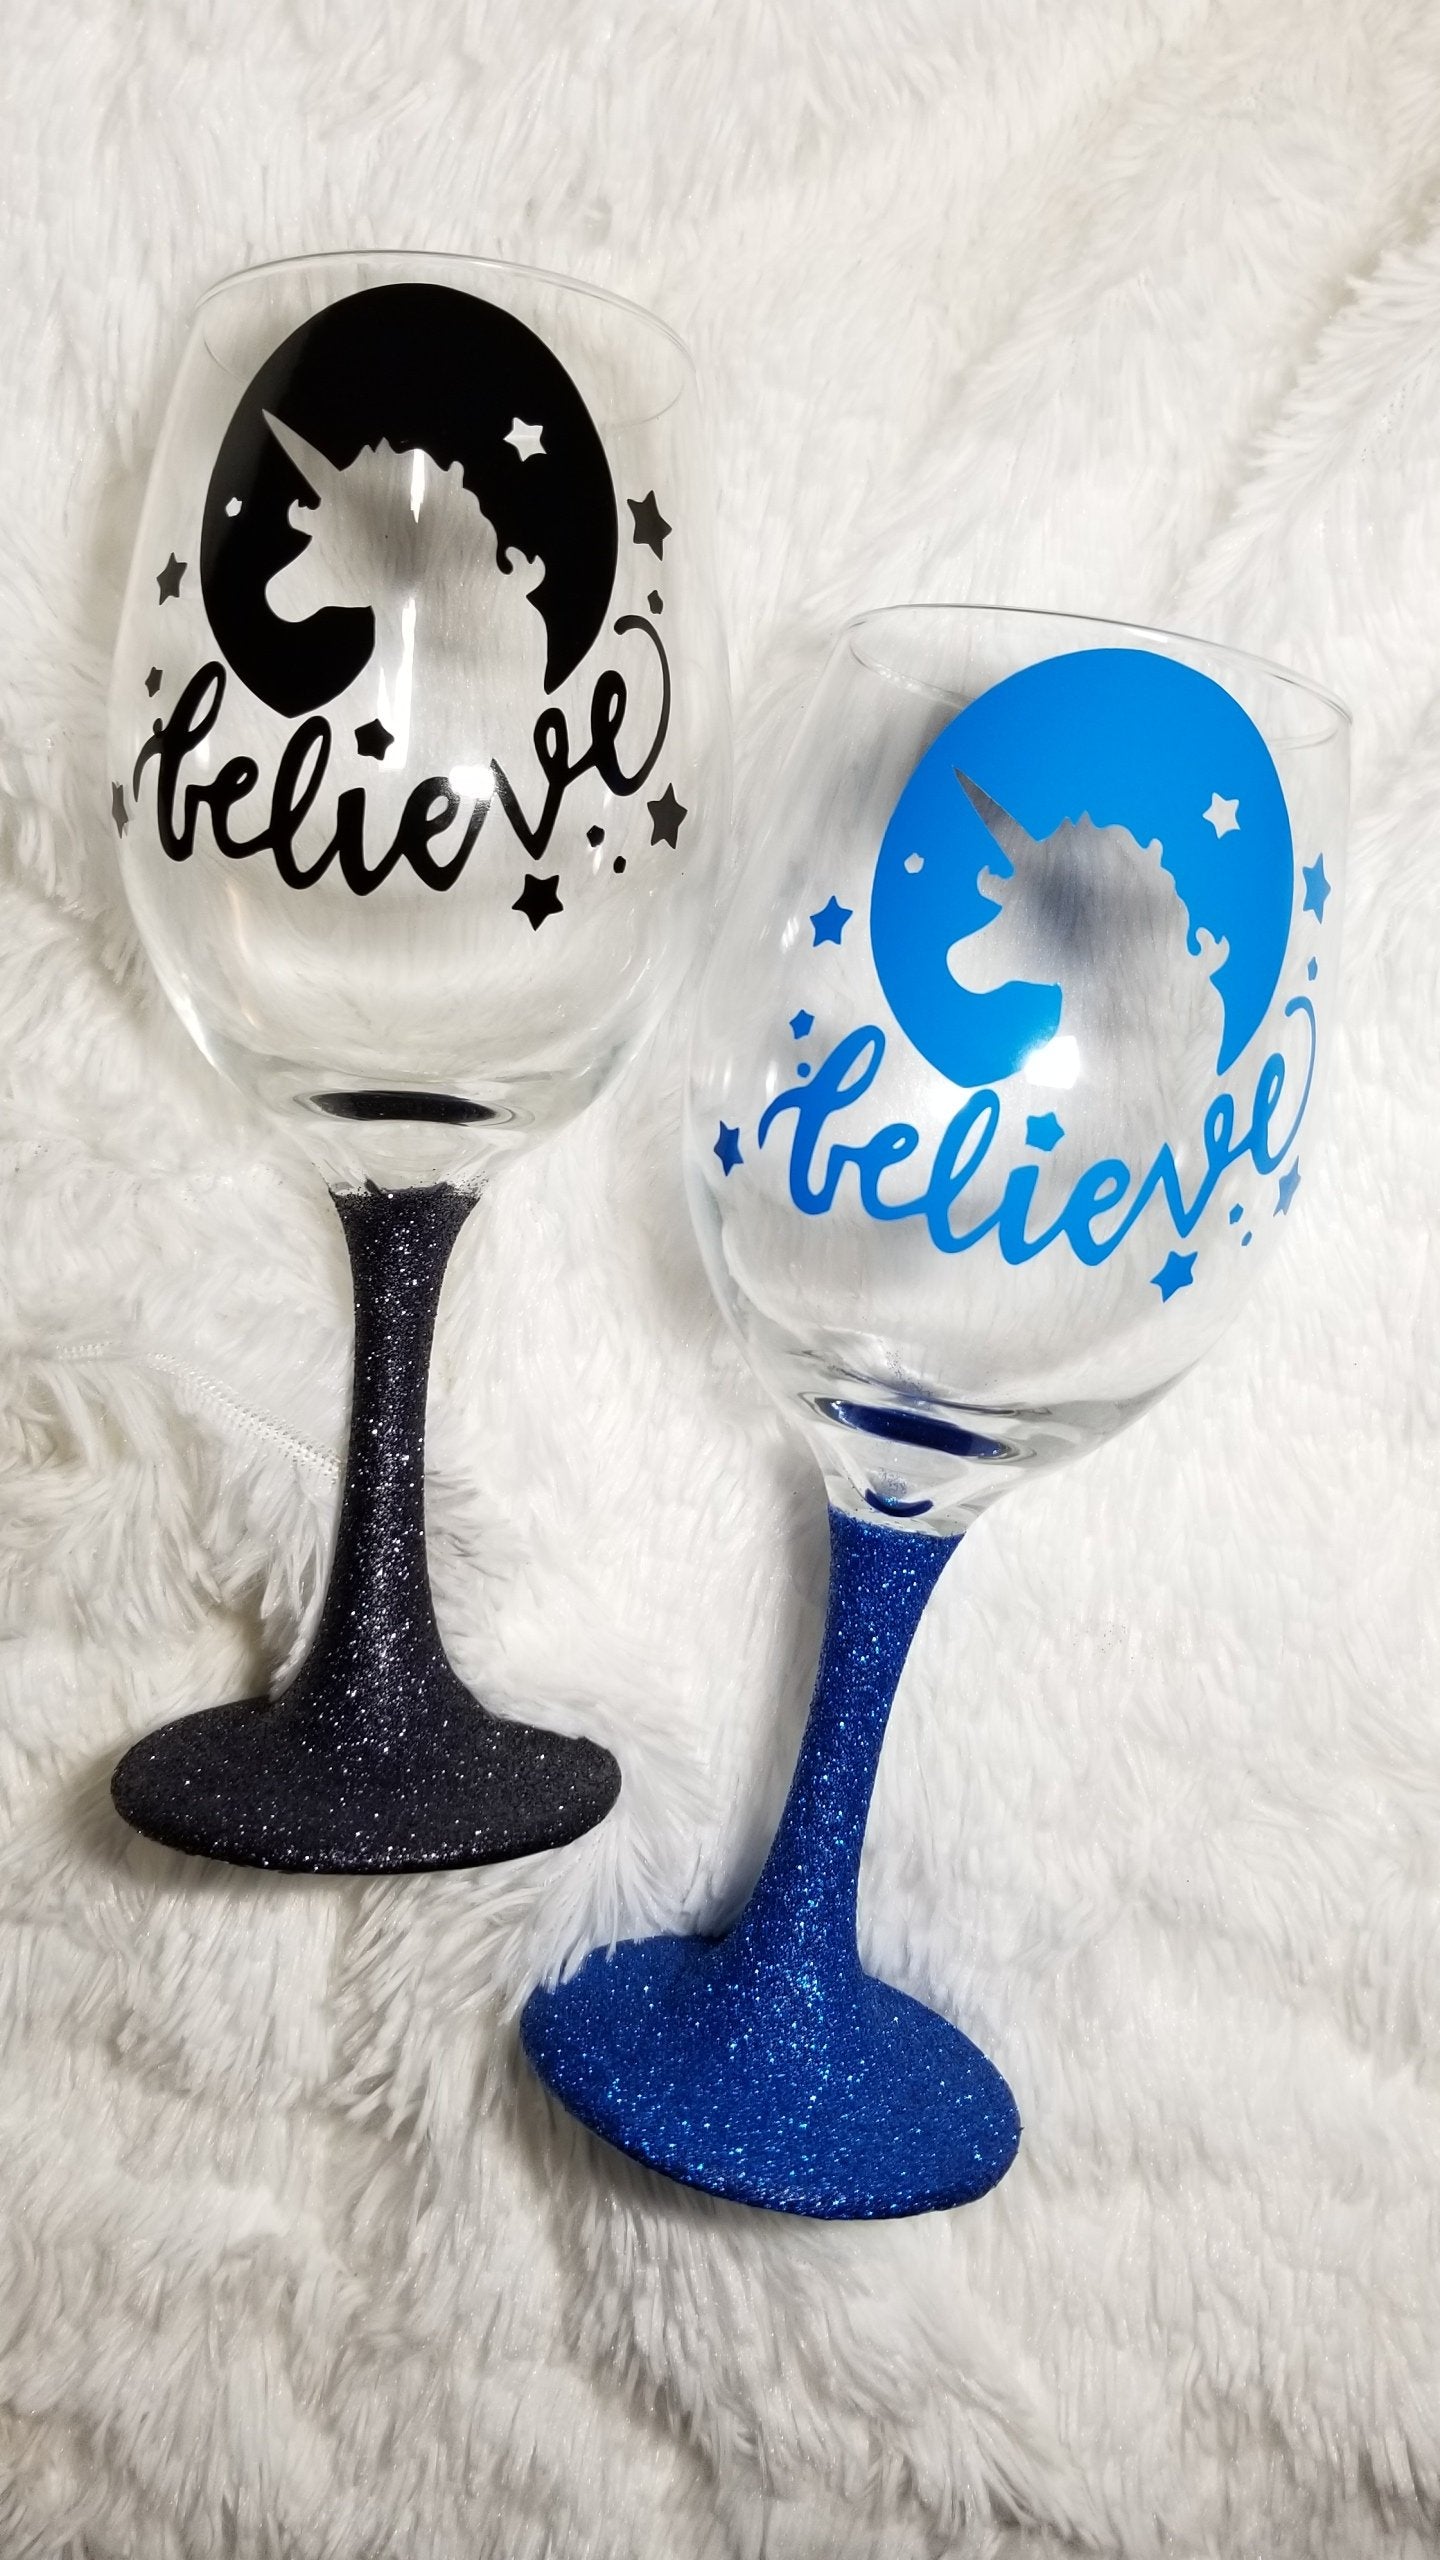 Glitter Wine Glass, Unicorn wine glass, personalized wine glass, Gift for her, Magical Creatures - CCCreationz